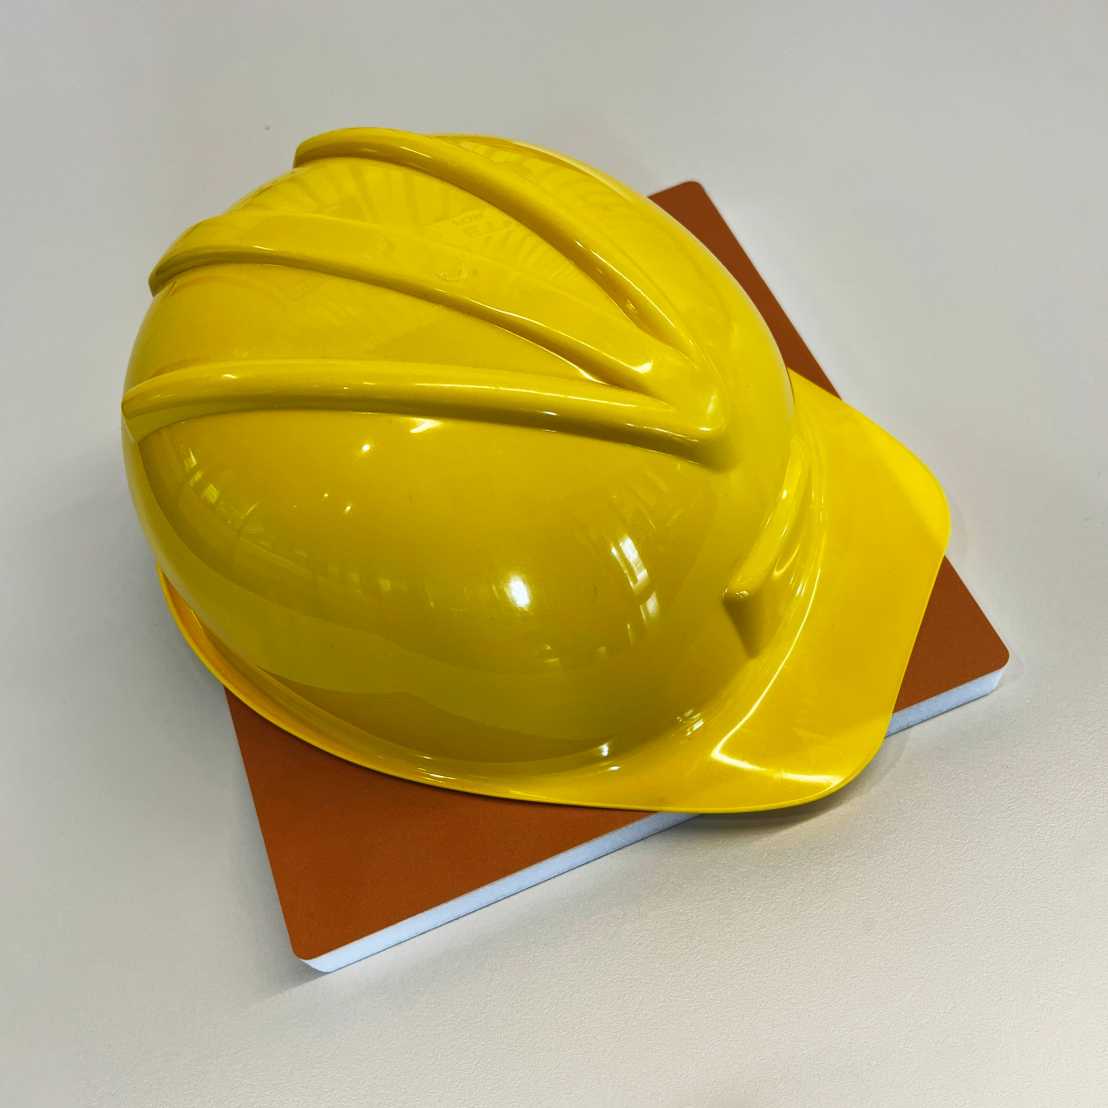 yellow protective hat worn on construction sites